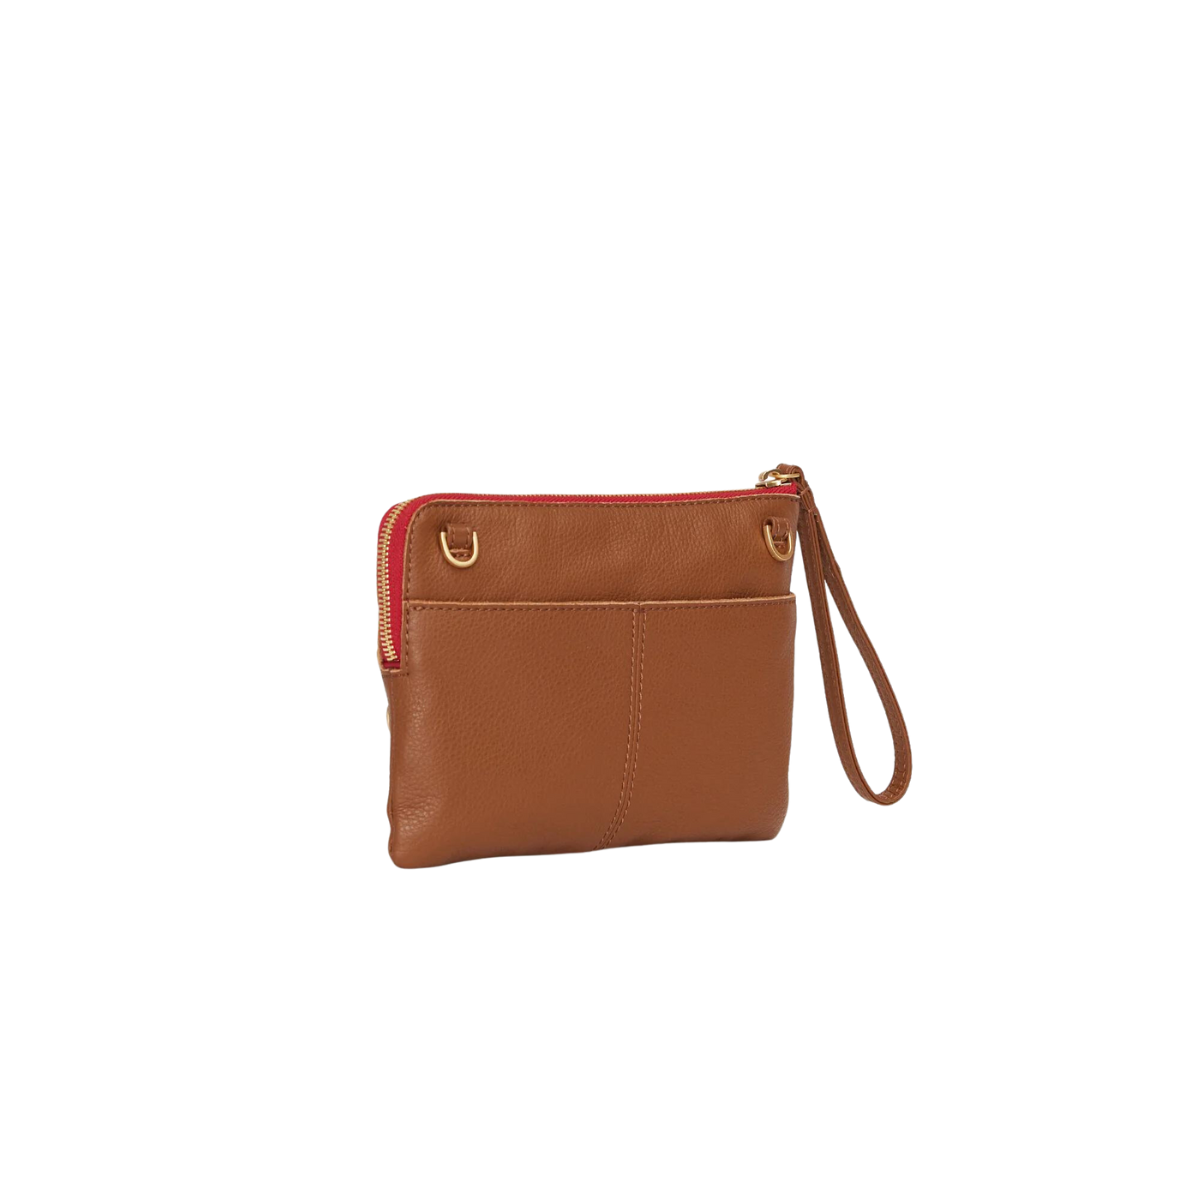 Hammitt Nash Small in Mahogany Pebble with Brushed Gold & Red Zip